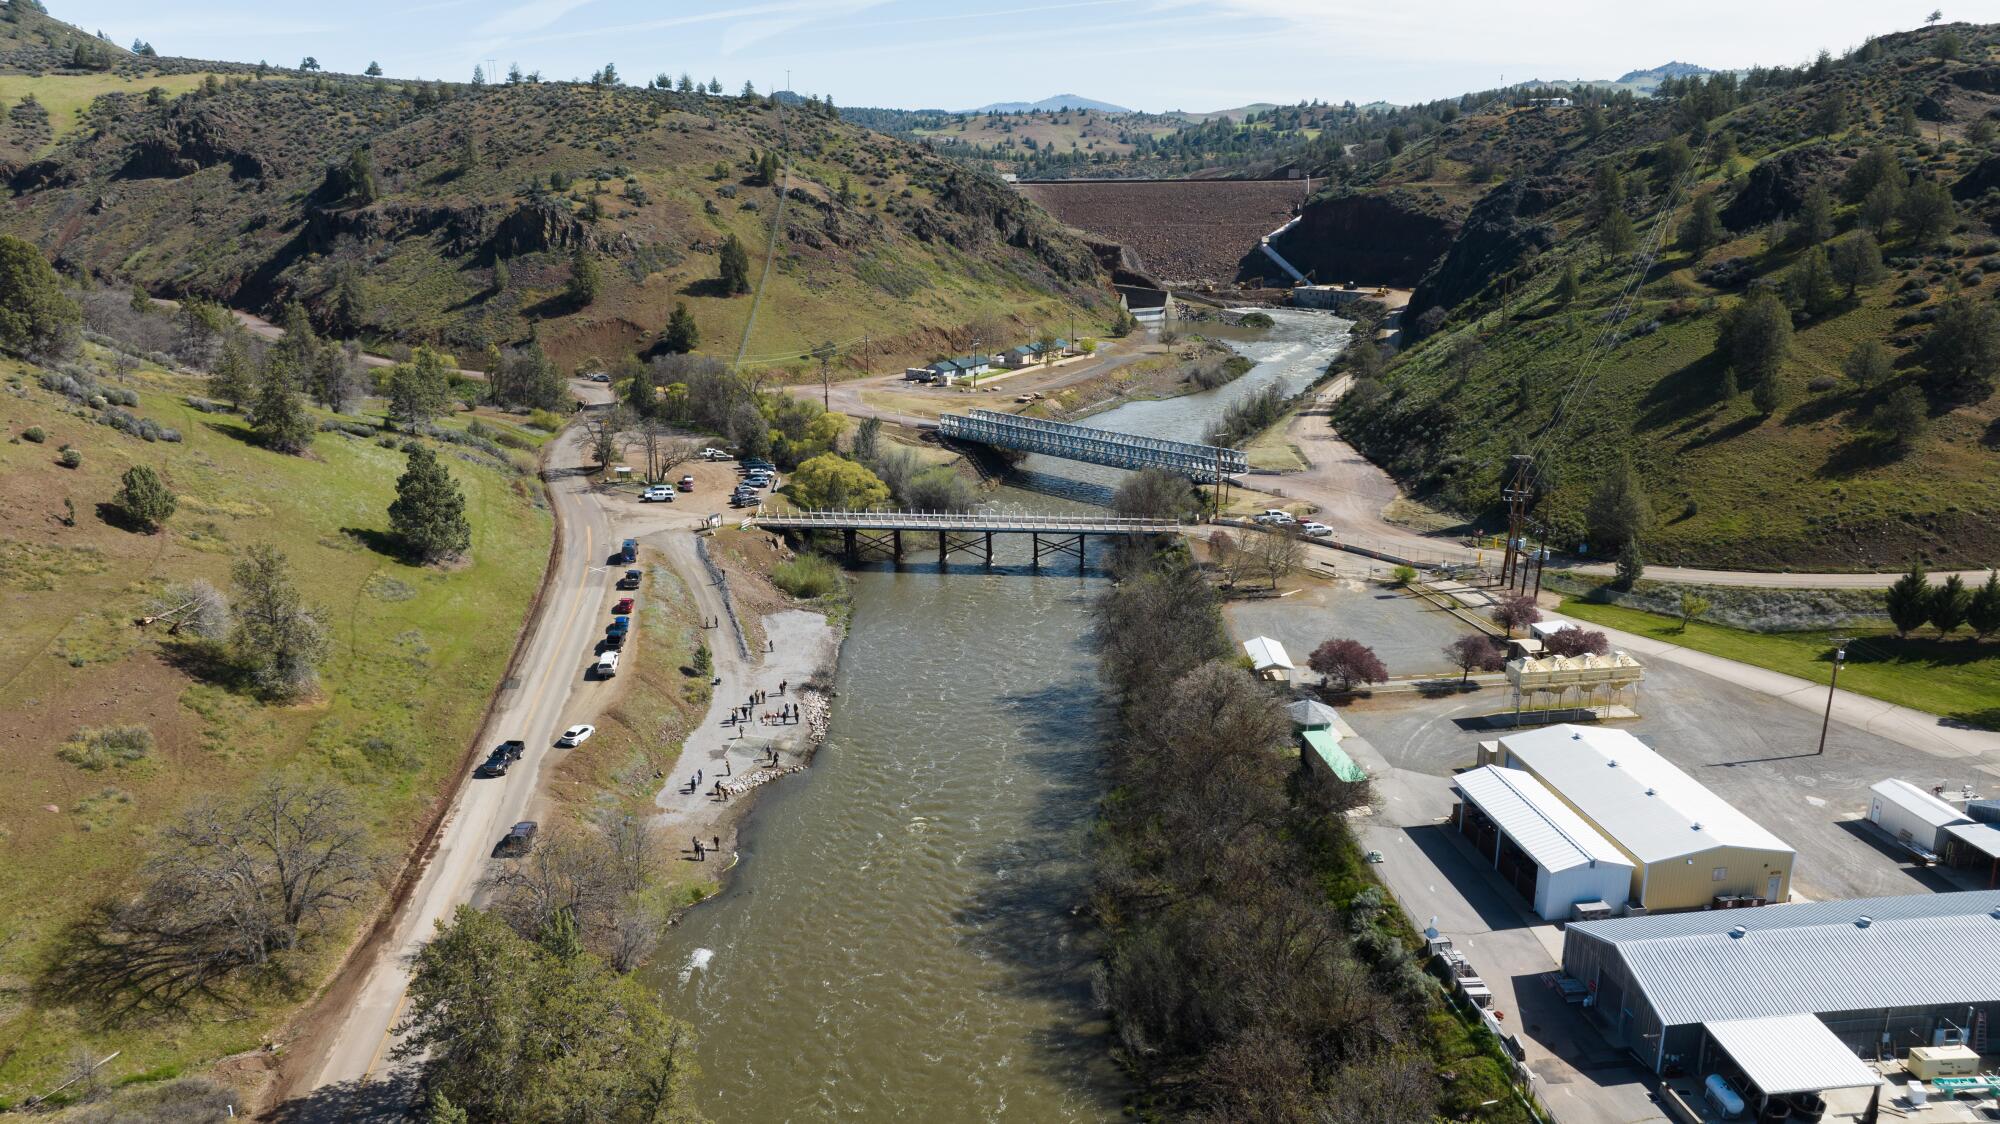 An aerial view of the Klamath River downstream of Iron Gate Dam, where hatchery-raised salmon were released.